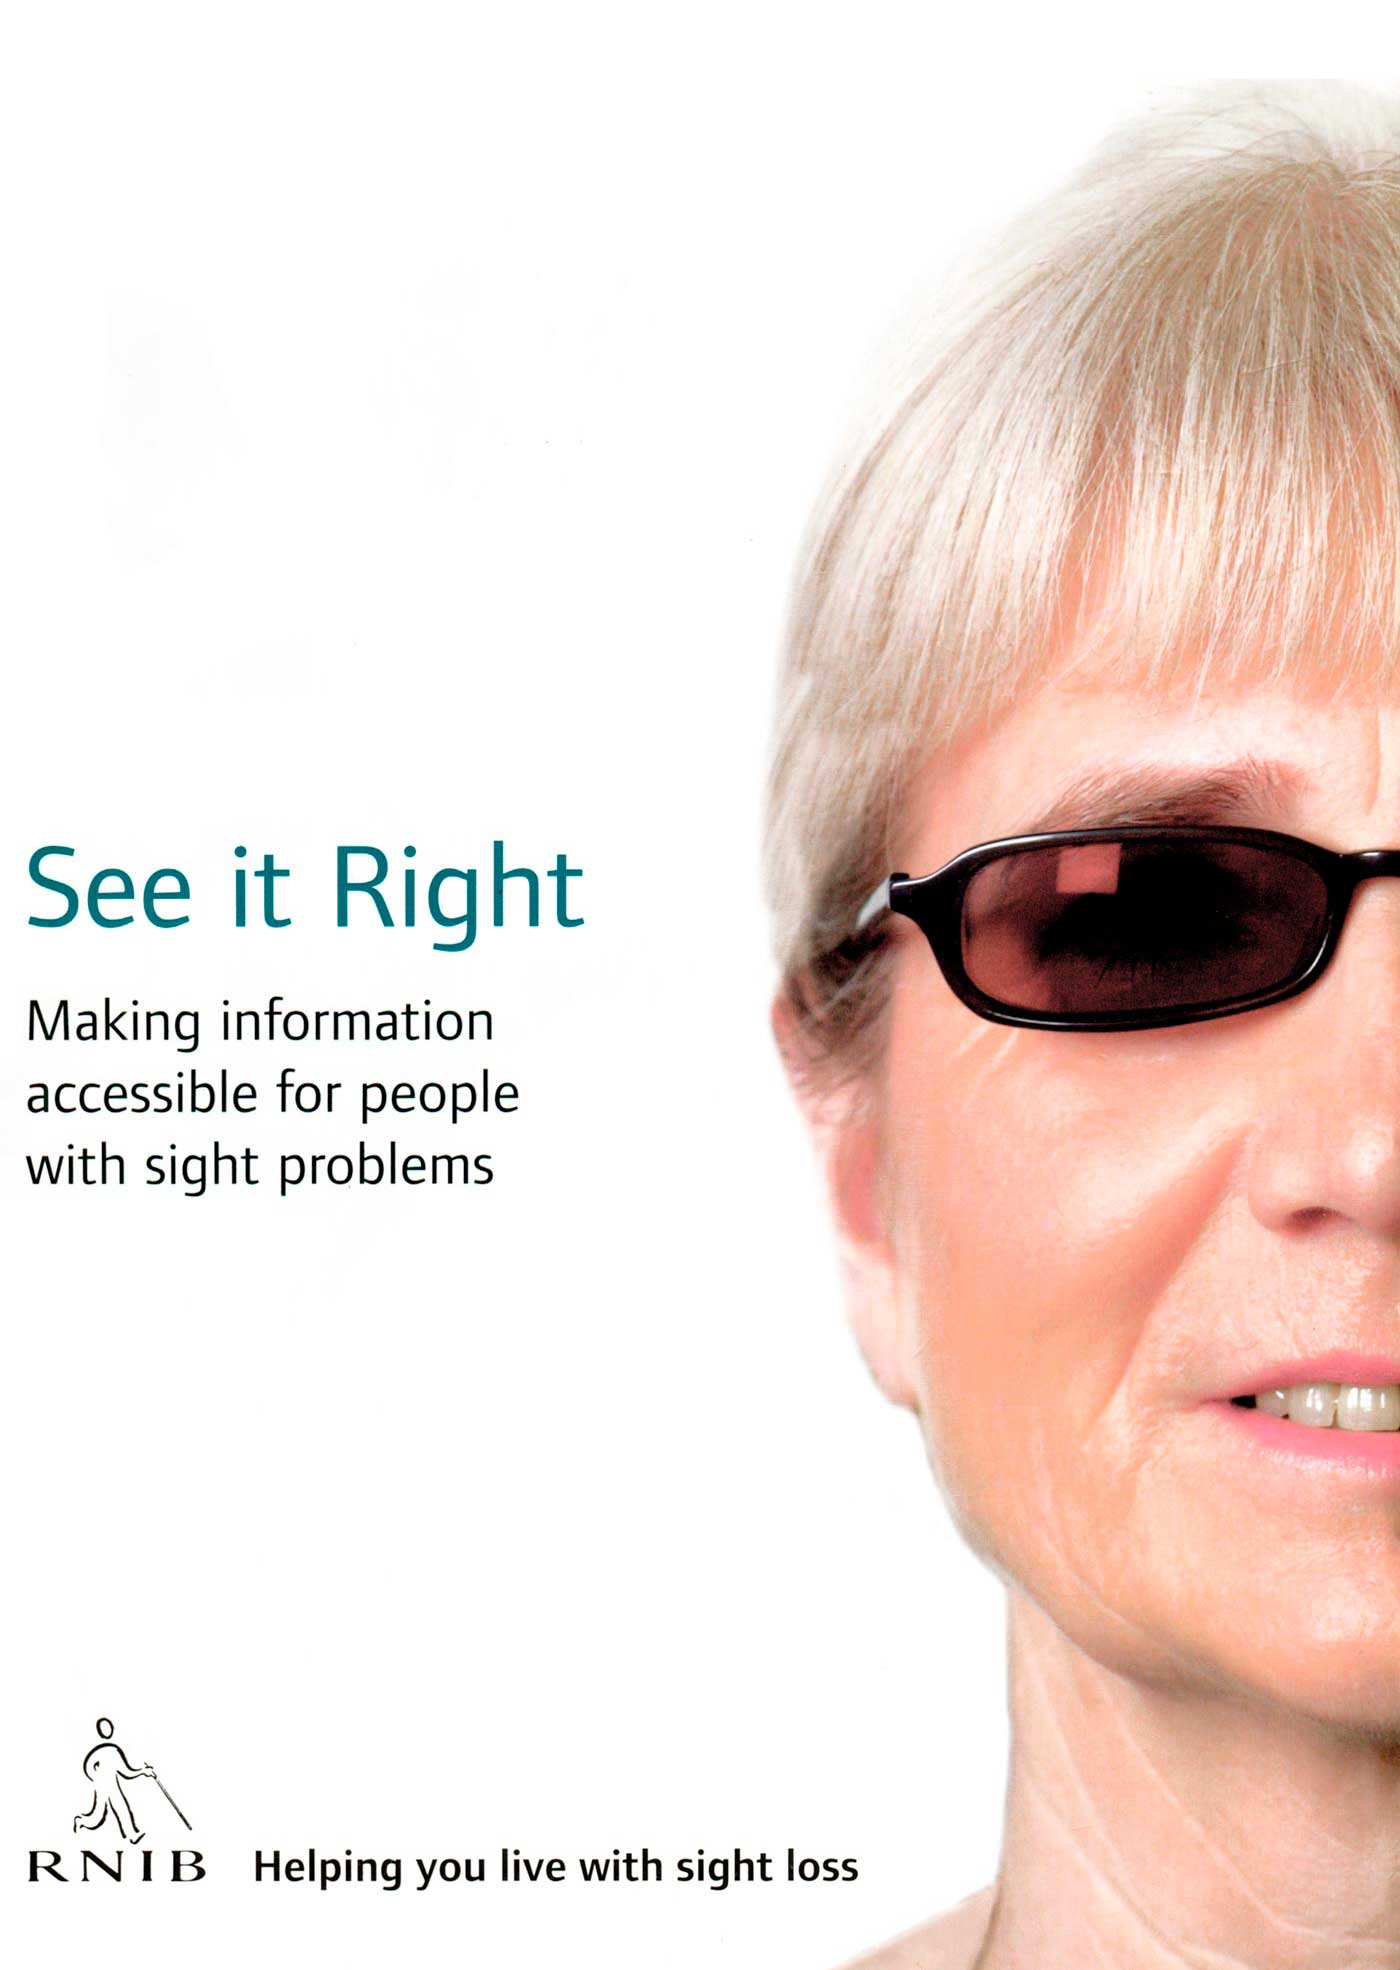 See it right: Making information accessible for people with sight problems book cover, with the title on the left in green and half a woman's face on the right wearing glasses